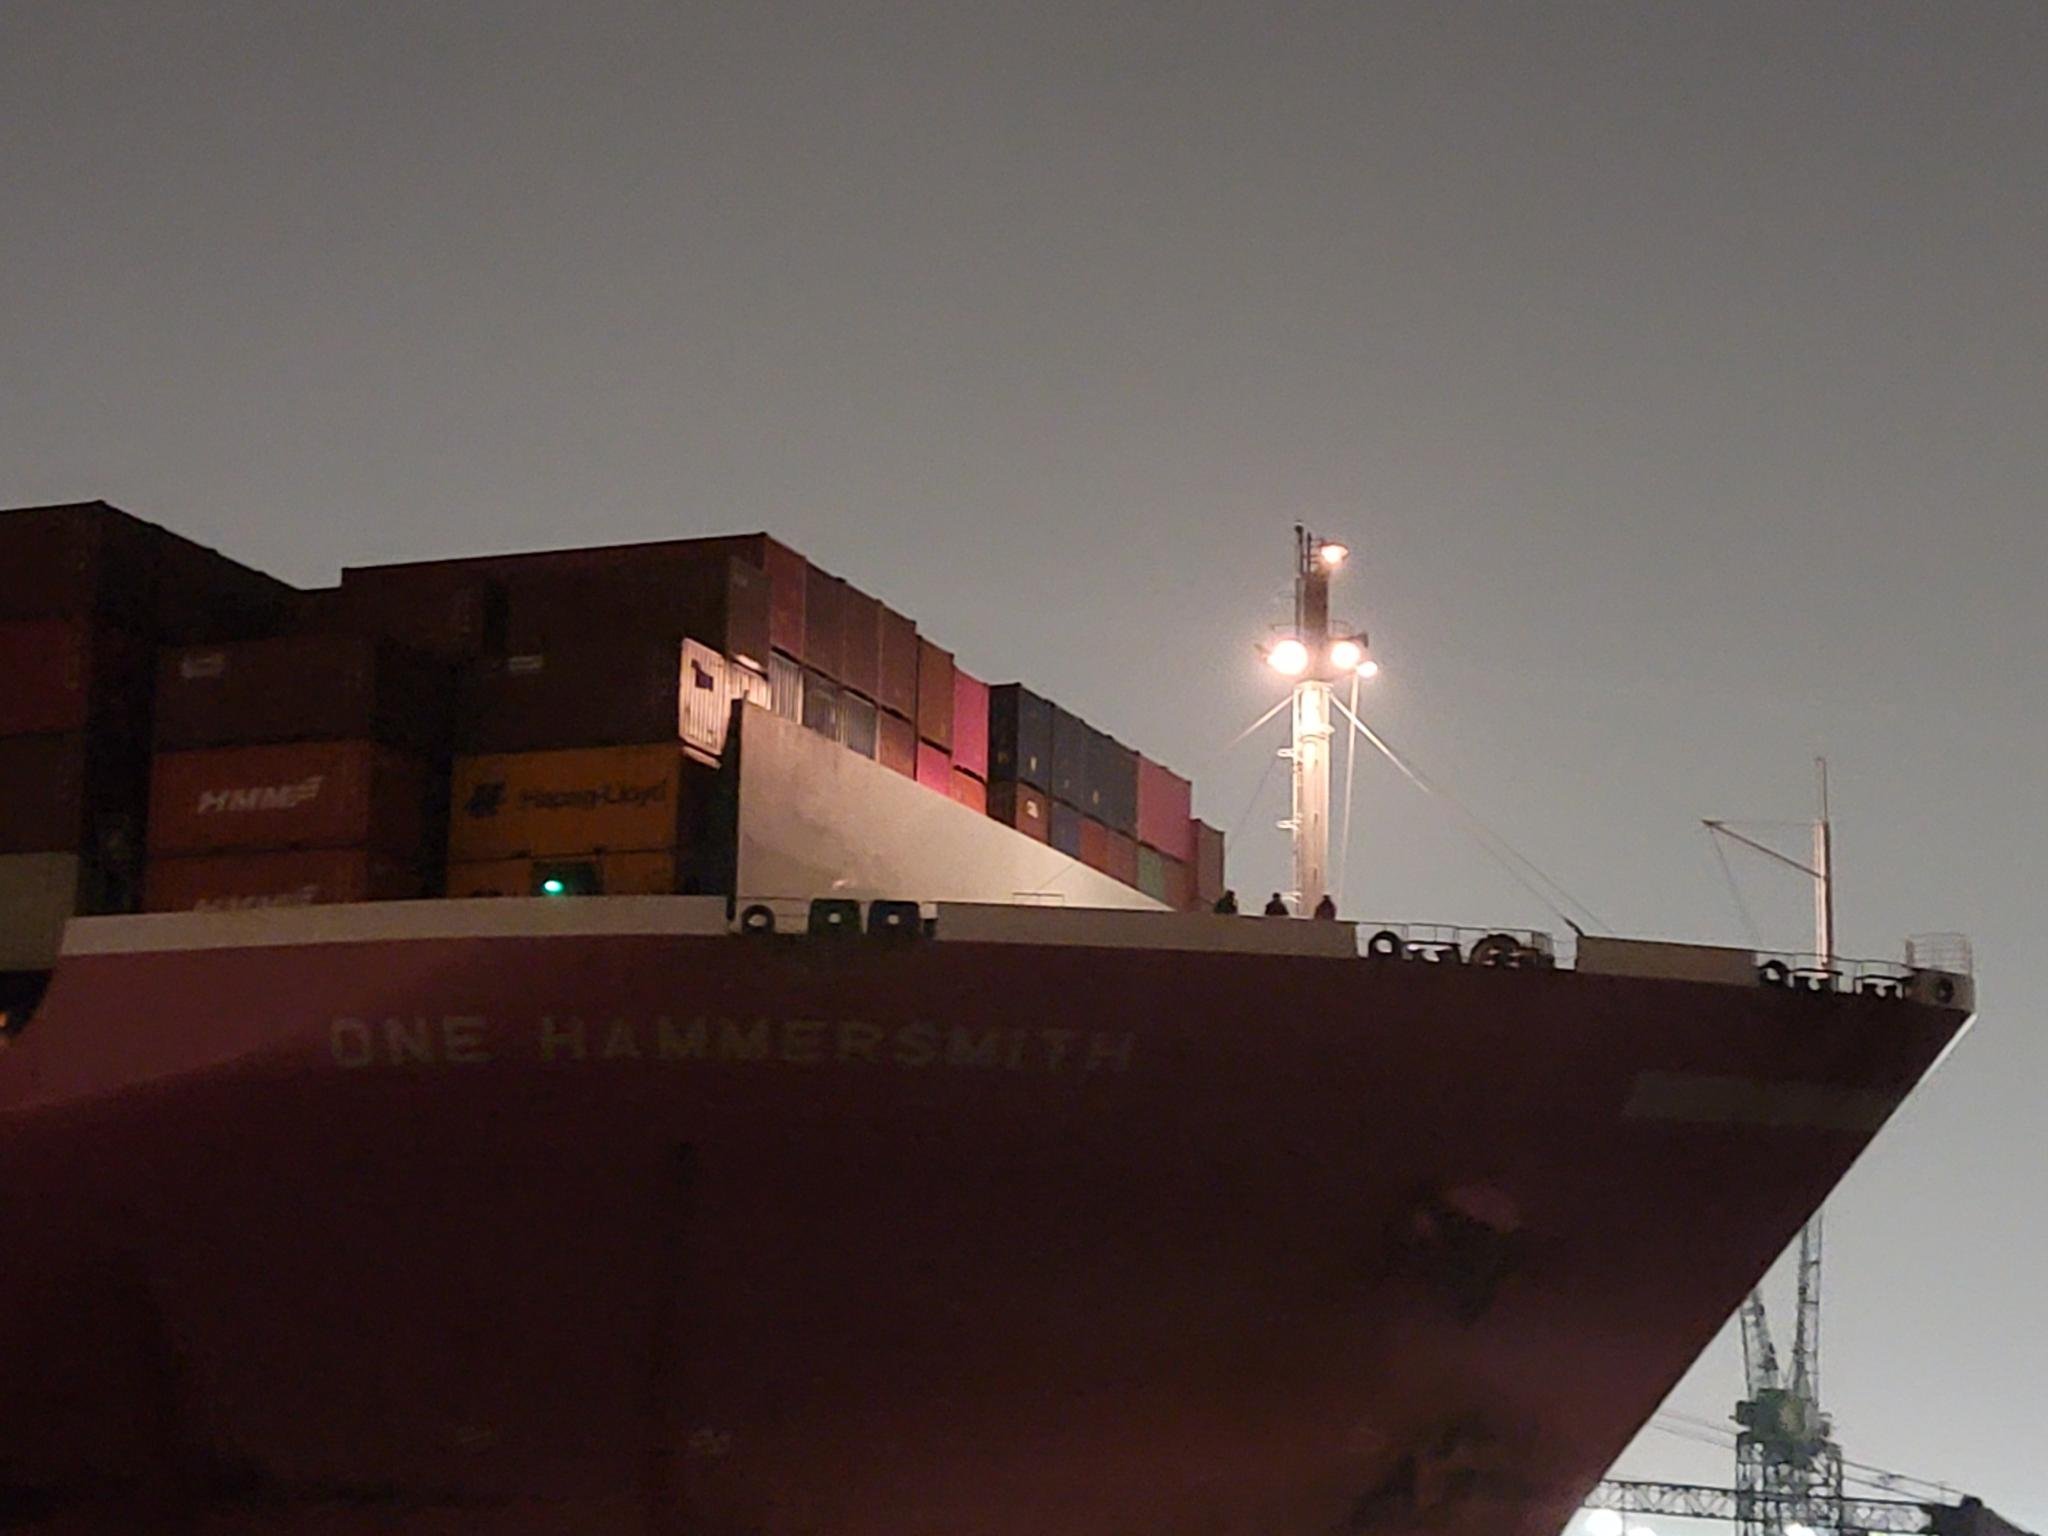 The bow of a container ship at night, illuminated by deck lights.